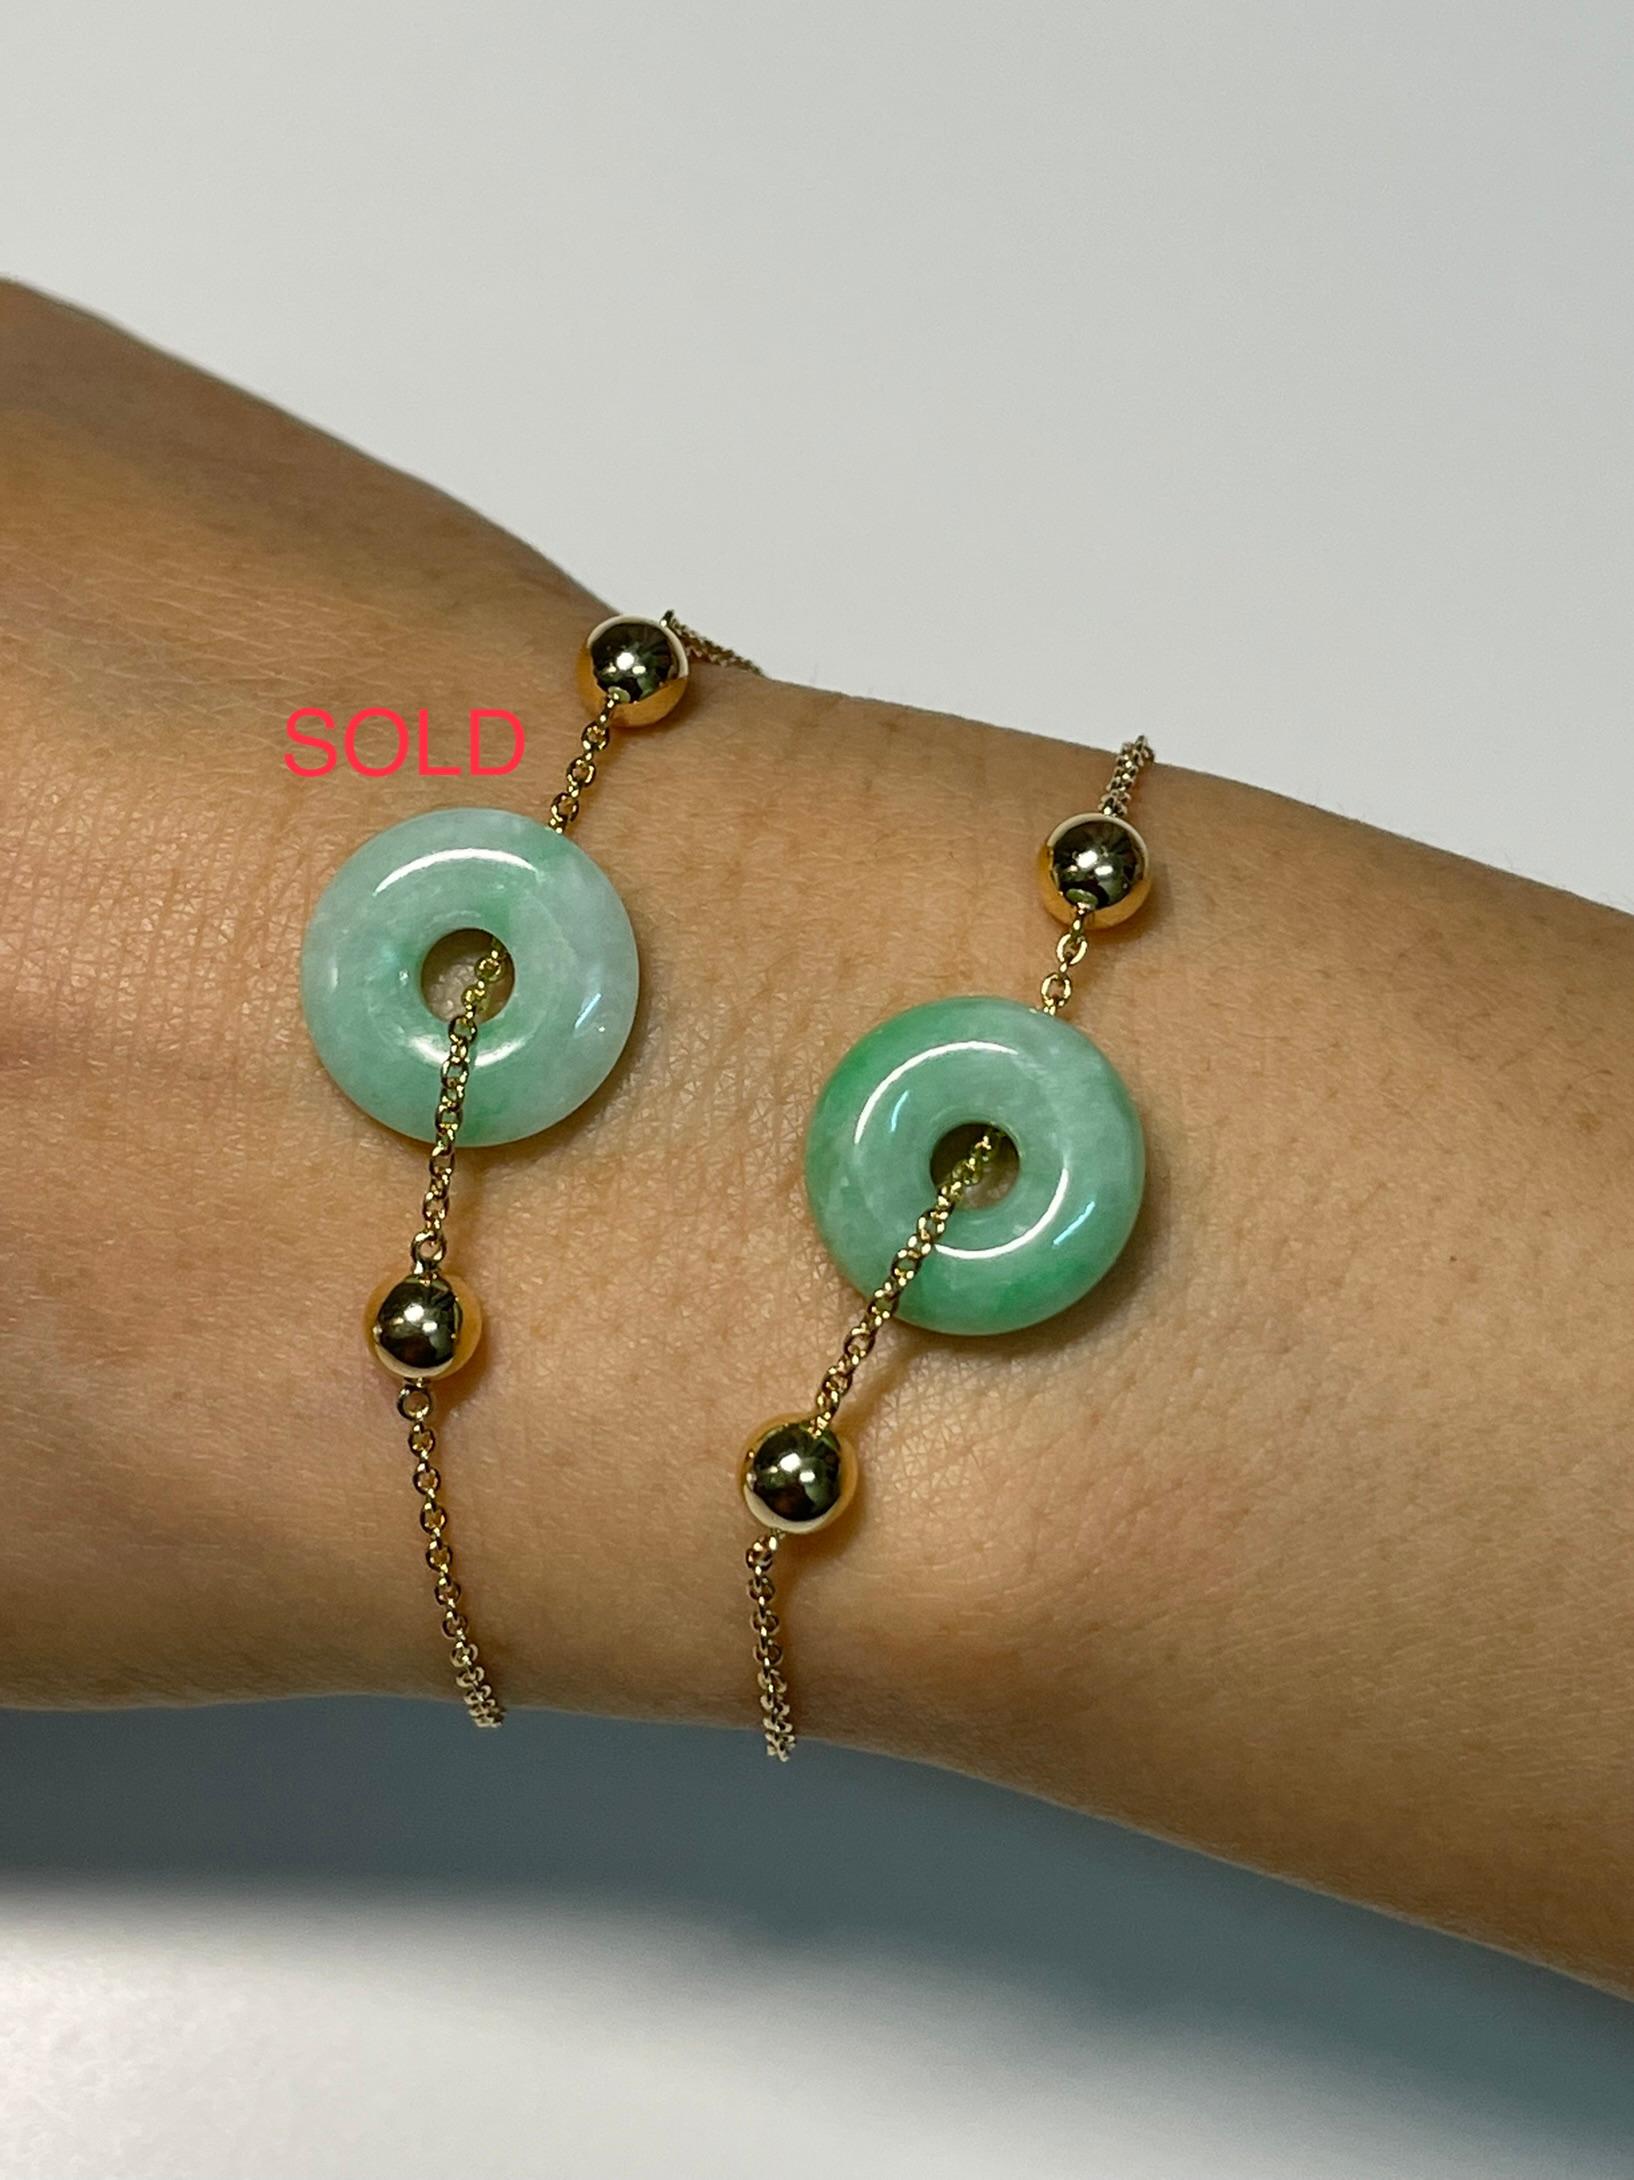 Please check out the HD video. This is certified natural jadeite jade. The bracelet is set in yellow gold. The jade donut has light green all over with patches of apple green. The untreated / un-enhanced natural jade in this bracelet is very eye